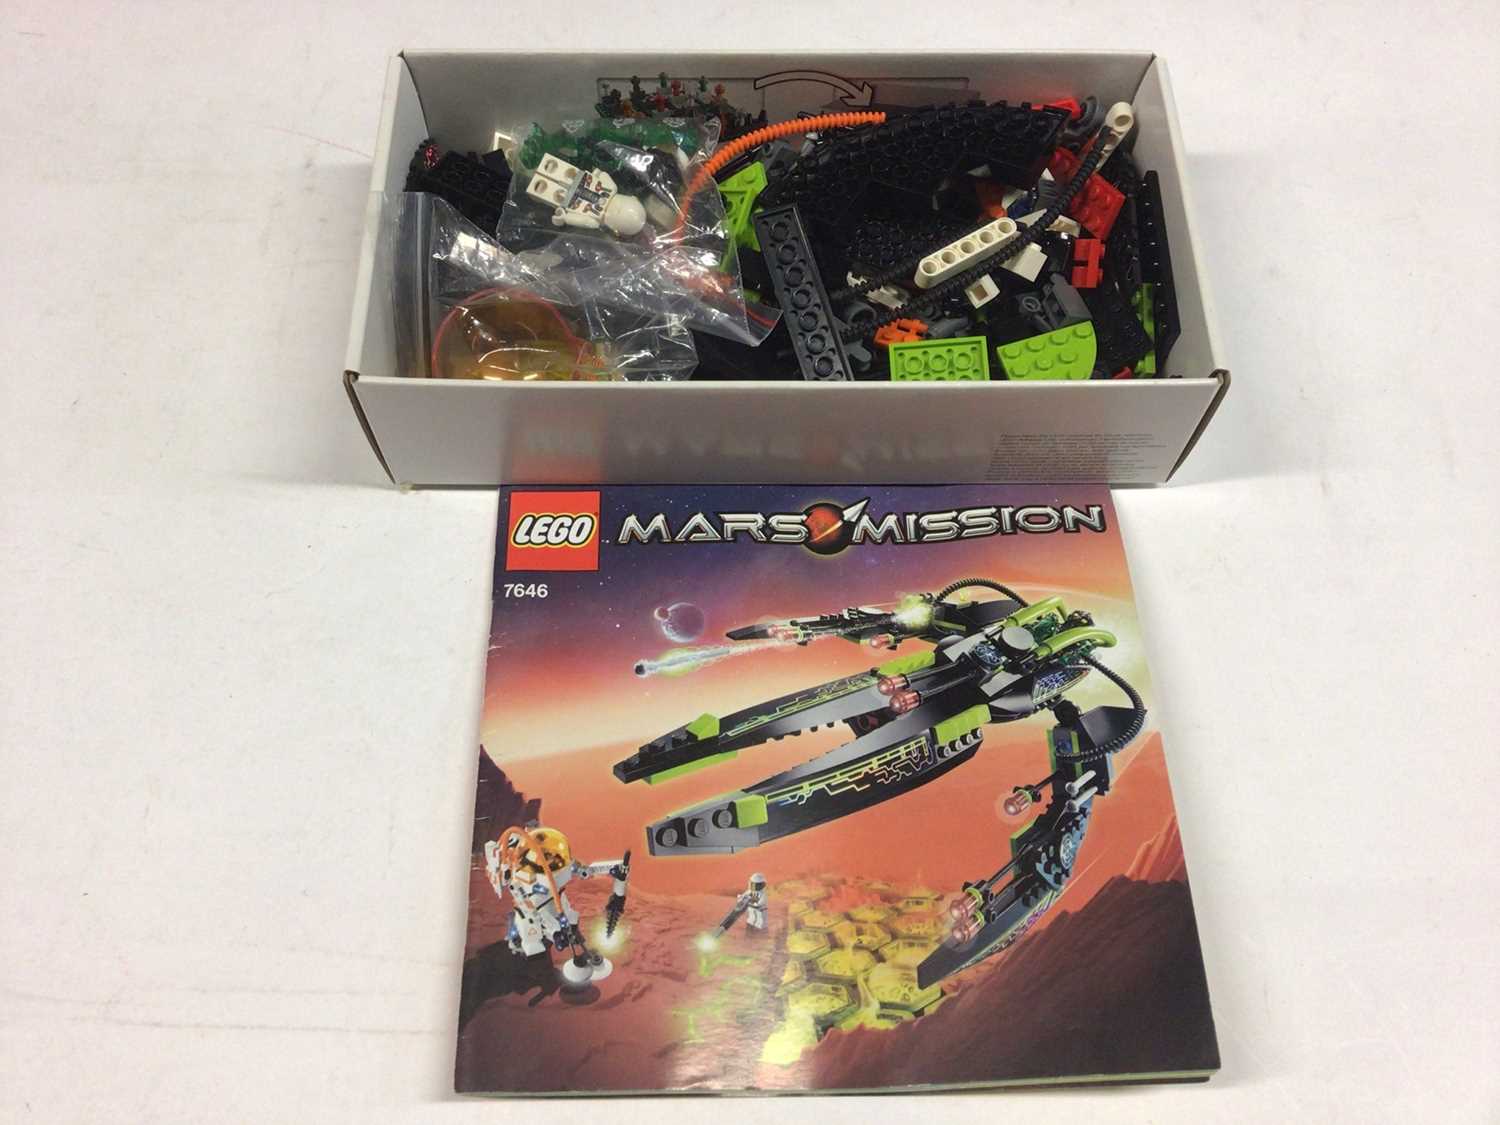 Lot 81 - Lego 10021 Constellation Ship, 8437 Future Car, 7067 Alien Conquest, 7646 Mars Mission Spaceship all with instructions, no boxes